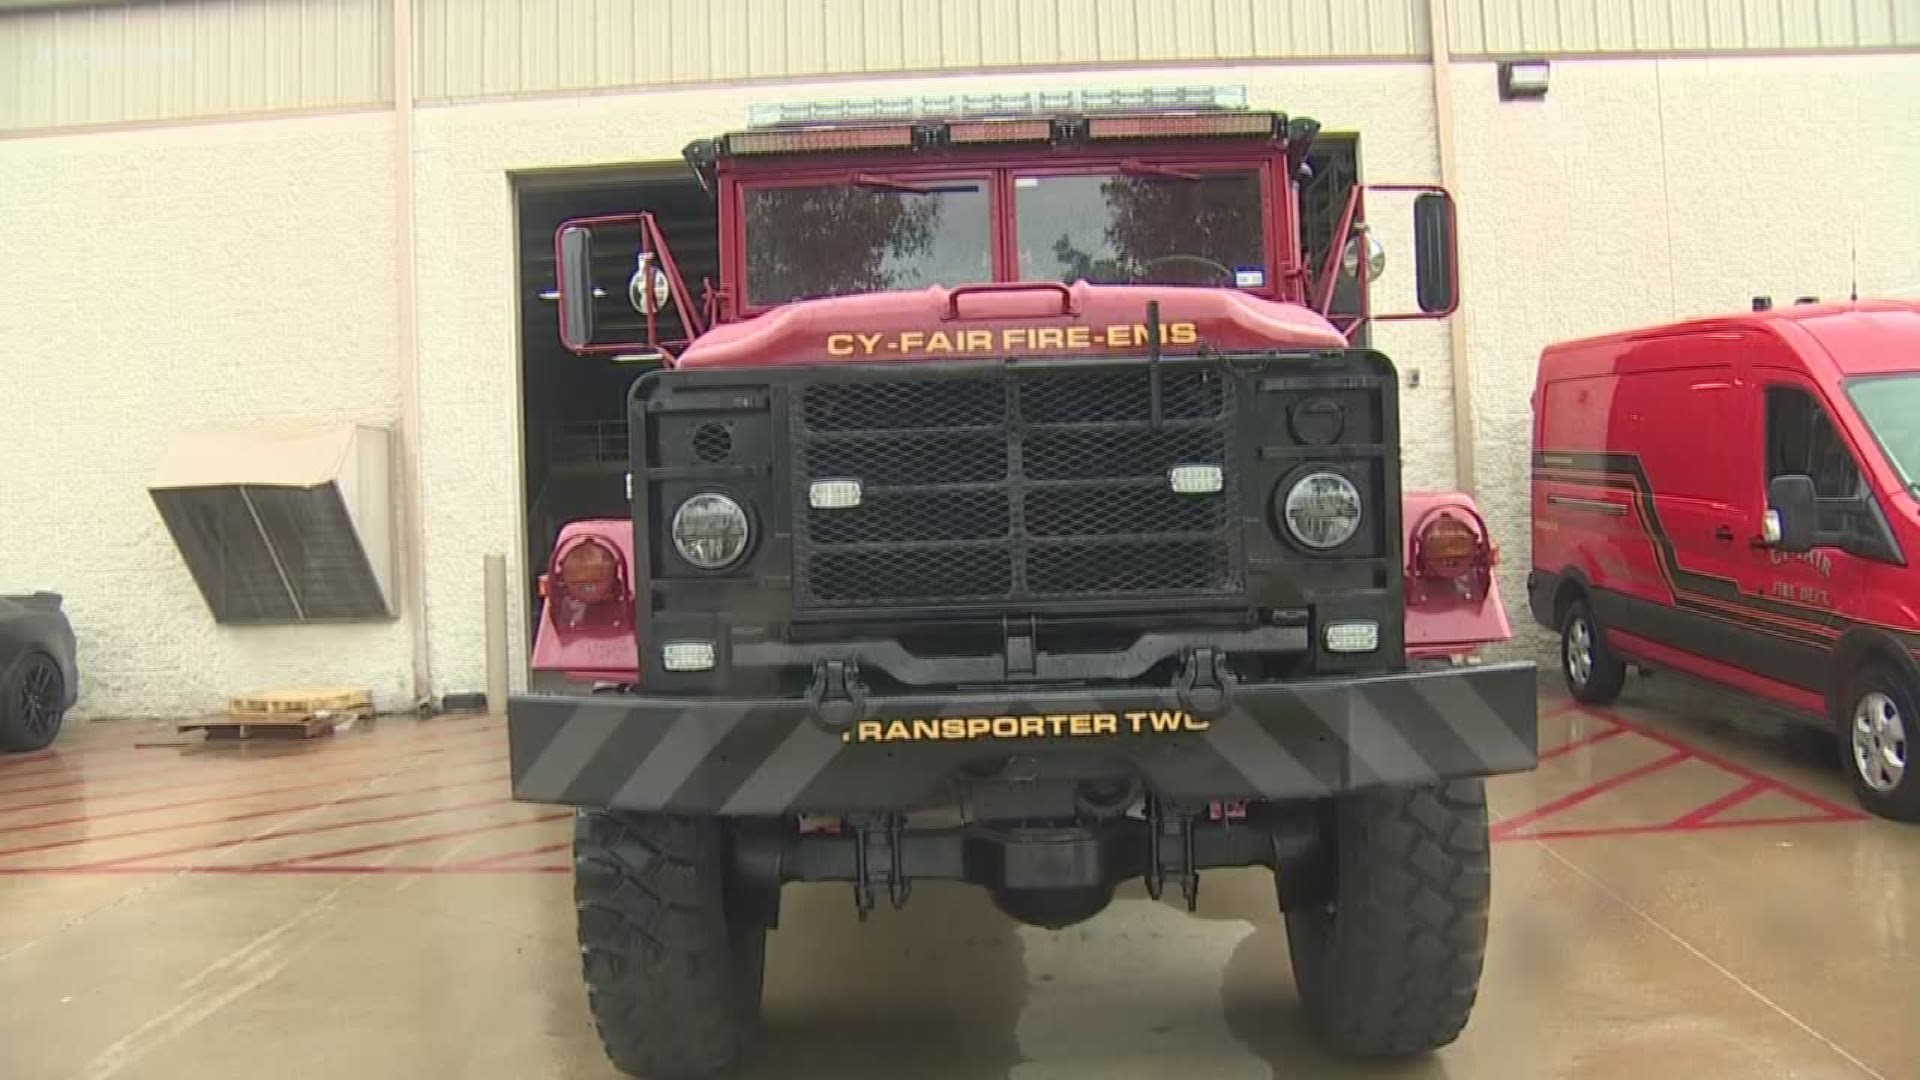 The Cy-Fair Fire Department used lessons from Harvey to prepare for future flooding. They pioneered the design of a re-outfitted military surplus vehicle to rescue people.